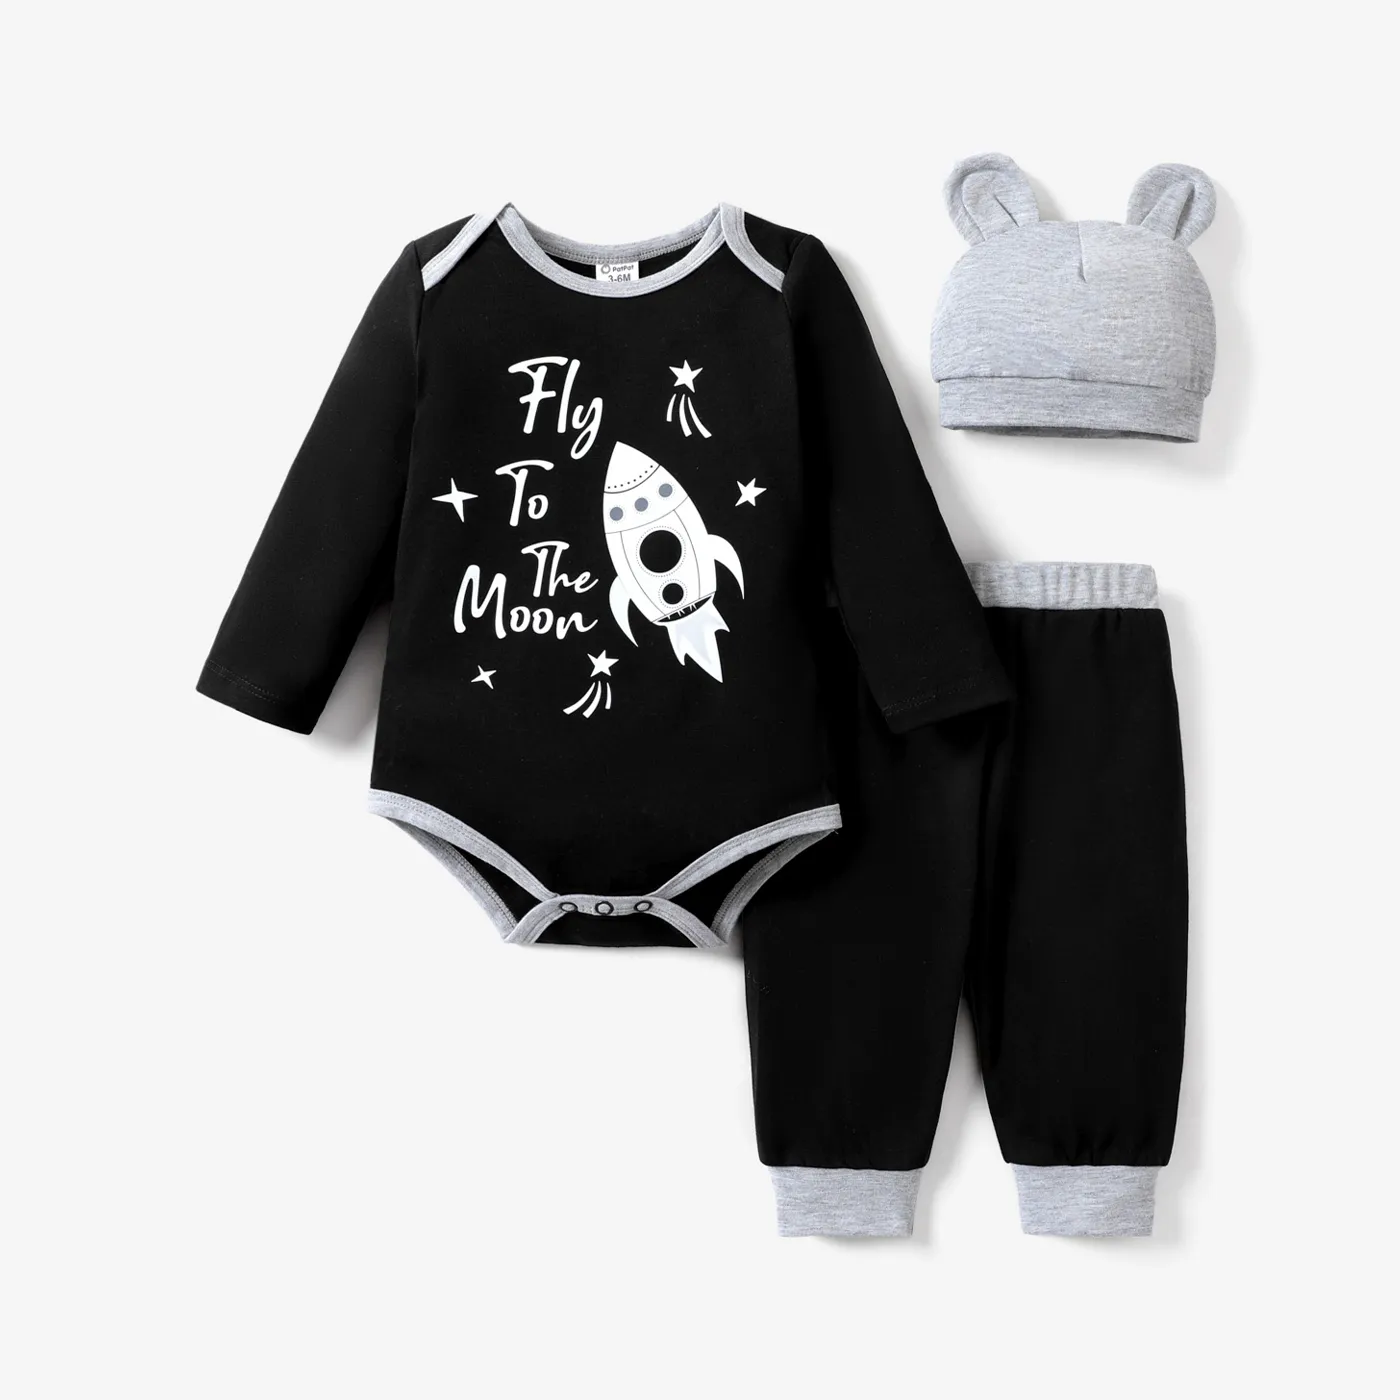 3pcs Baby Boy Avant-Garde Set For Festive Occasions With Medium Thickness